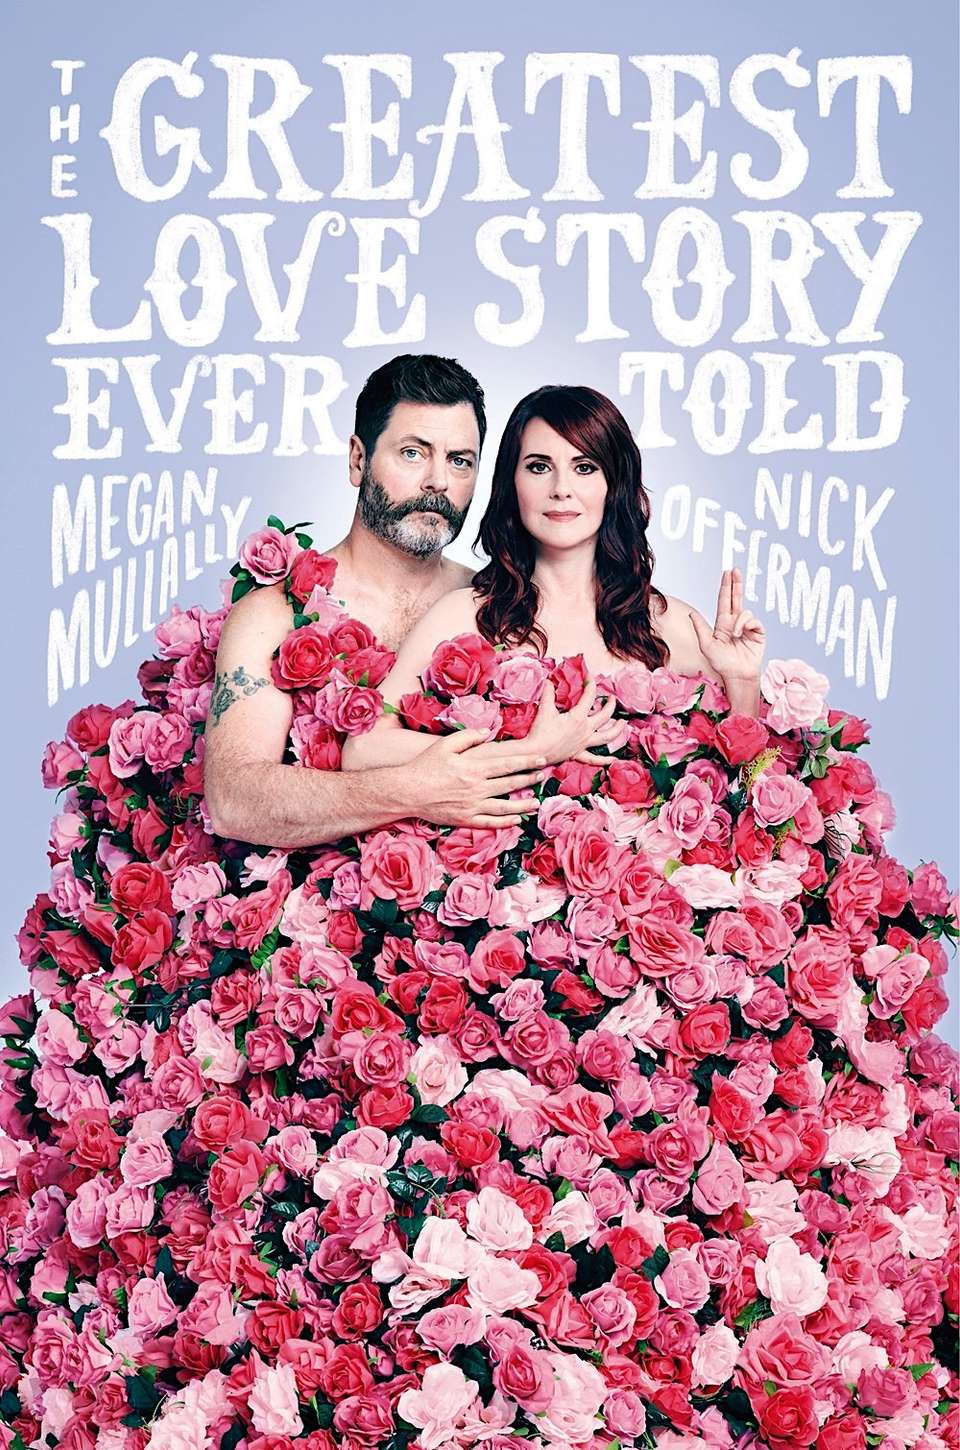 Book cover image of Nick Offerman & Megan Mullally under a blanket of pink roses.